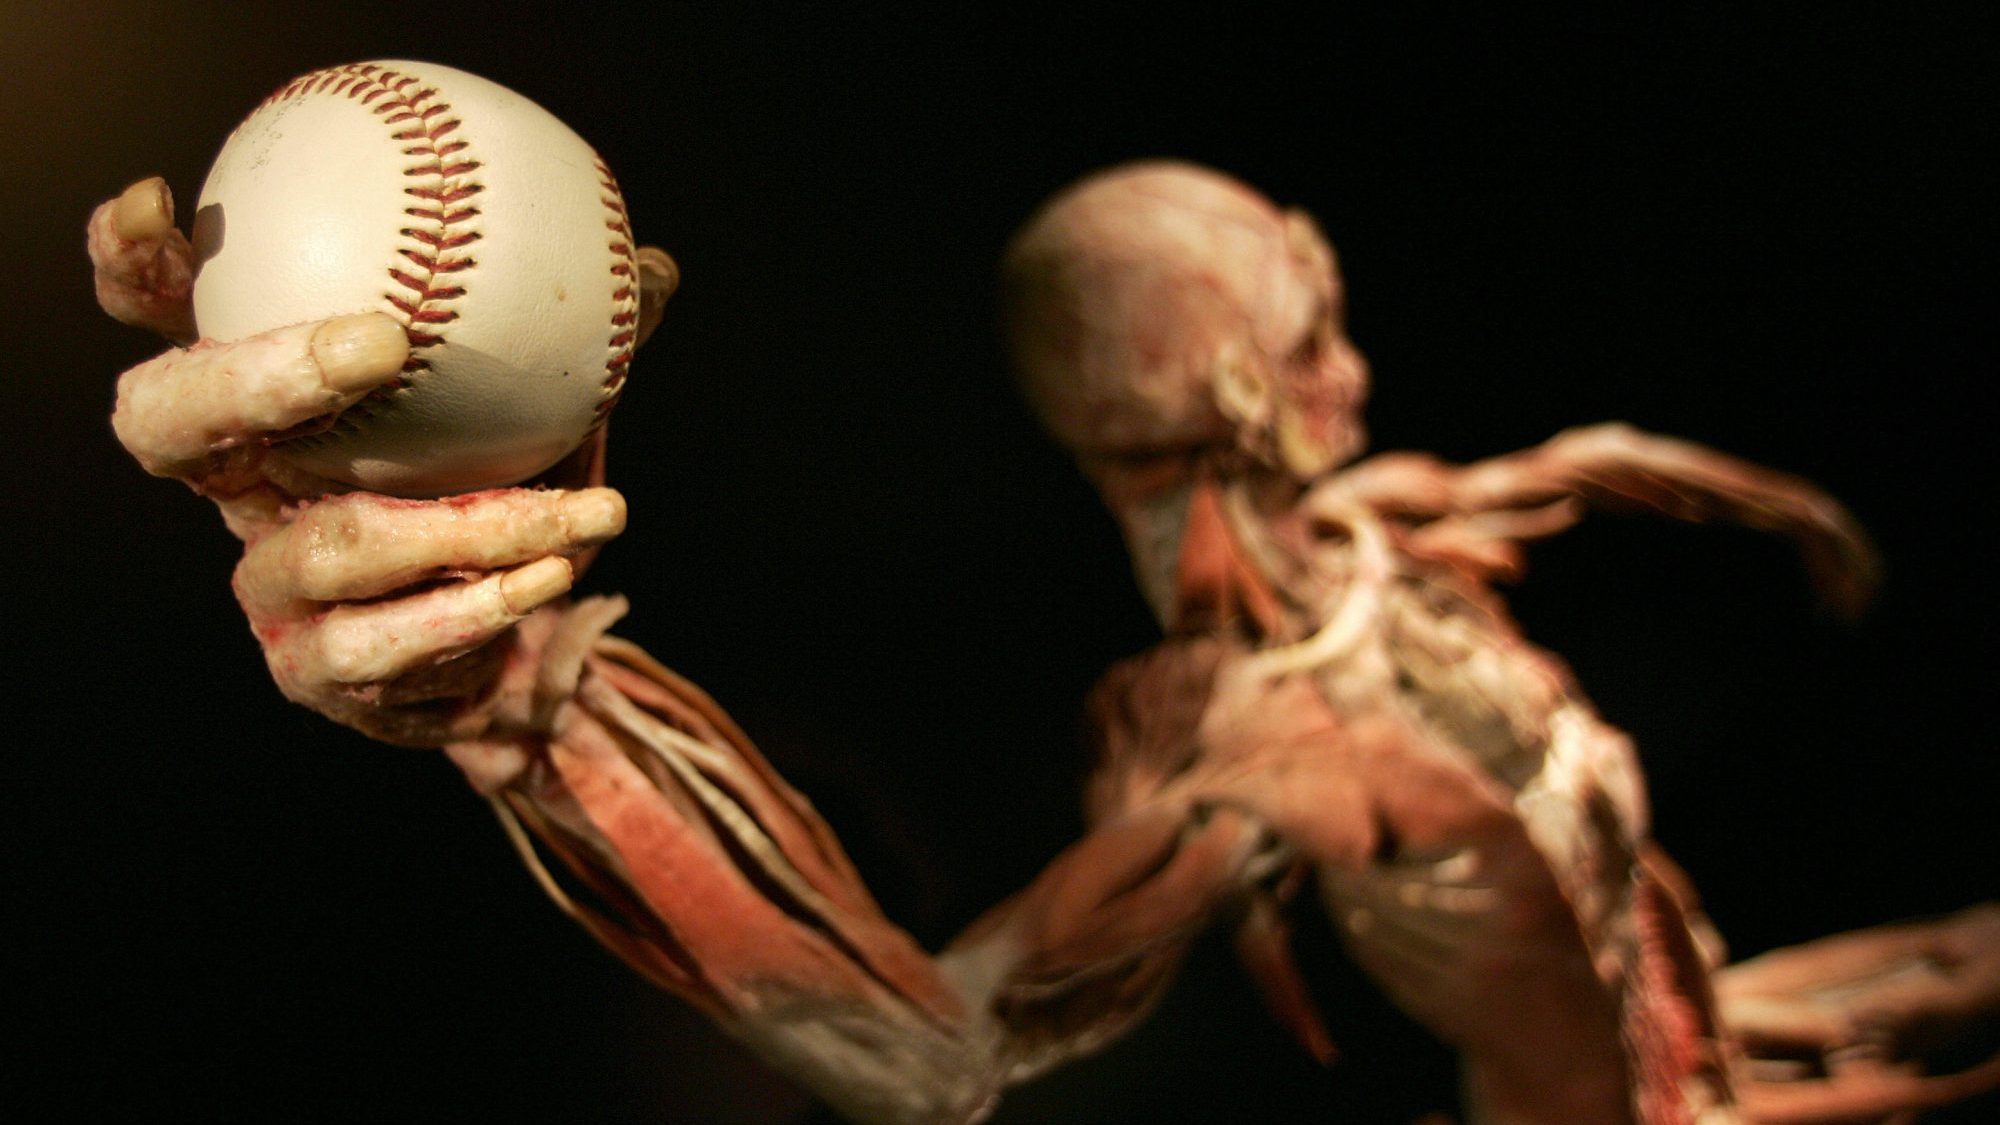 A human cadaver positioned as if throwing a baseball at "Bodies...The Exhibition".